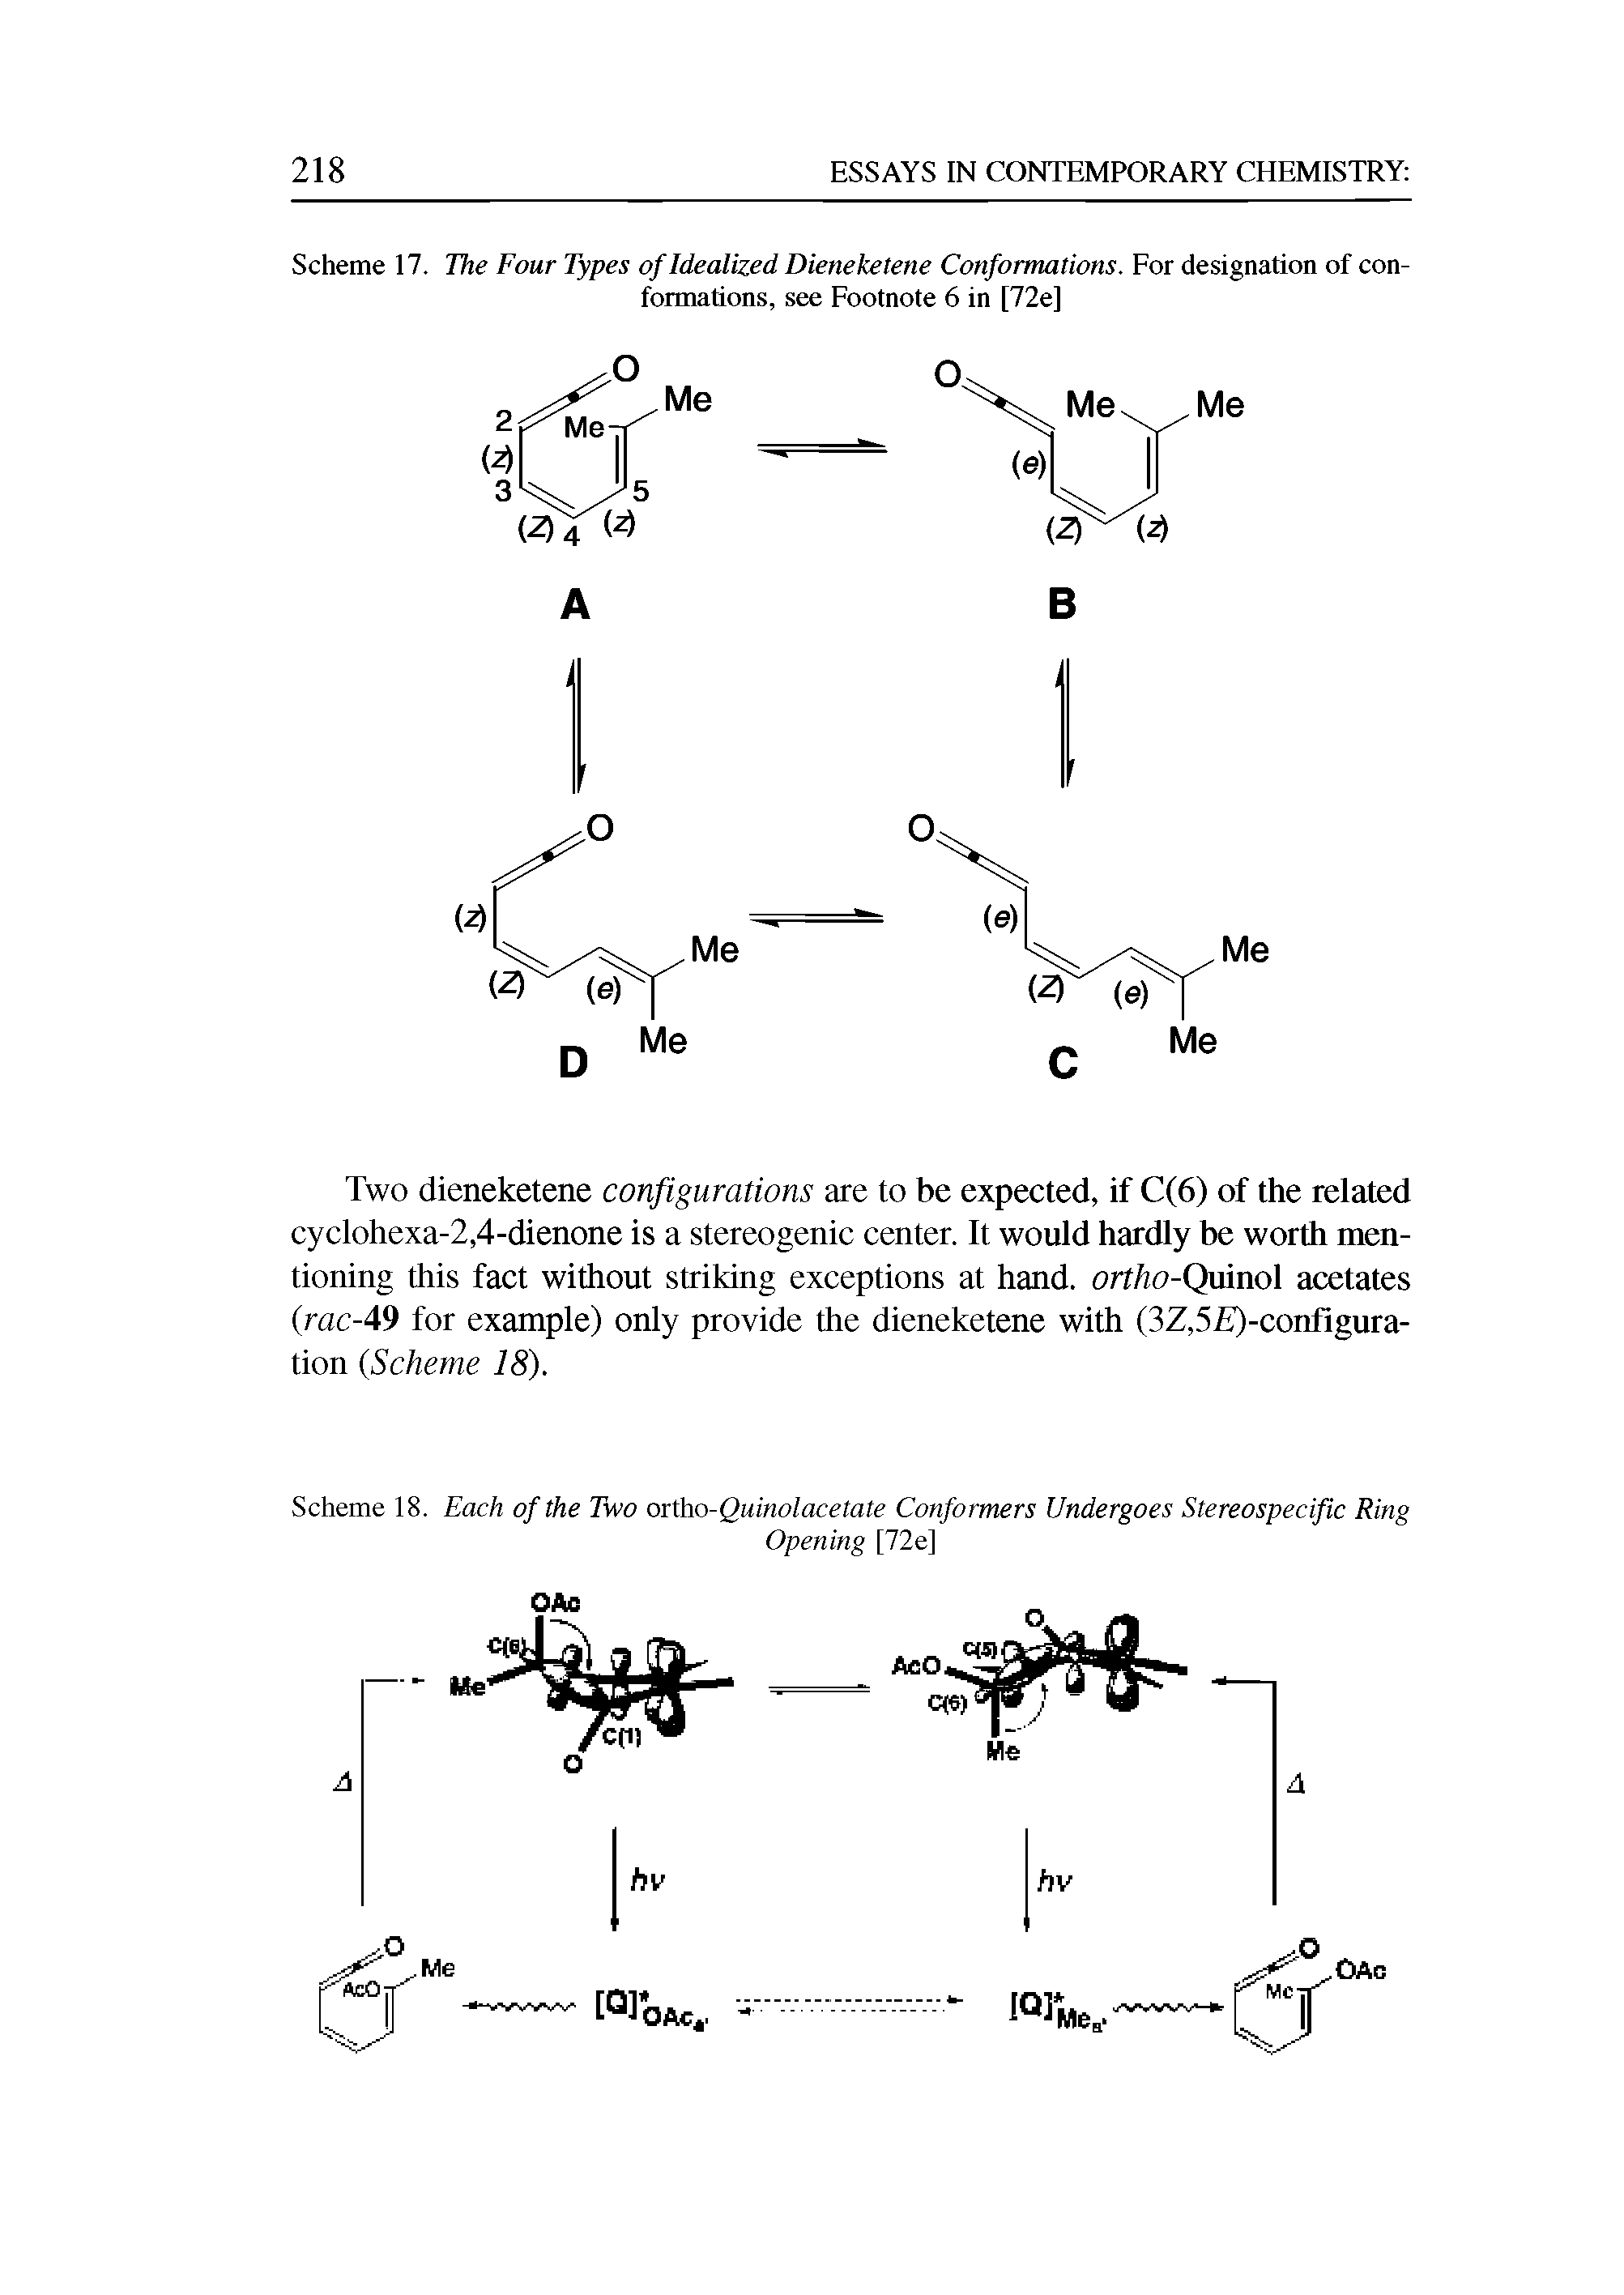 Scheme 17. The Four Types of Idealized Diene ketene Conformations. For designation of conformations, see Footnote 6 in [72e]...